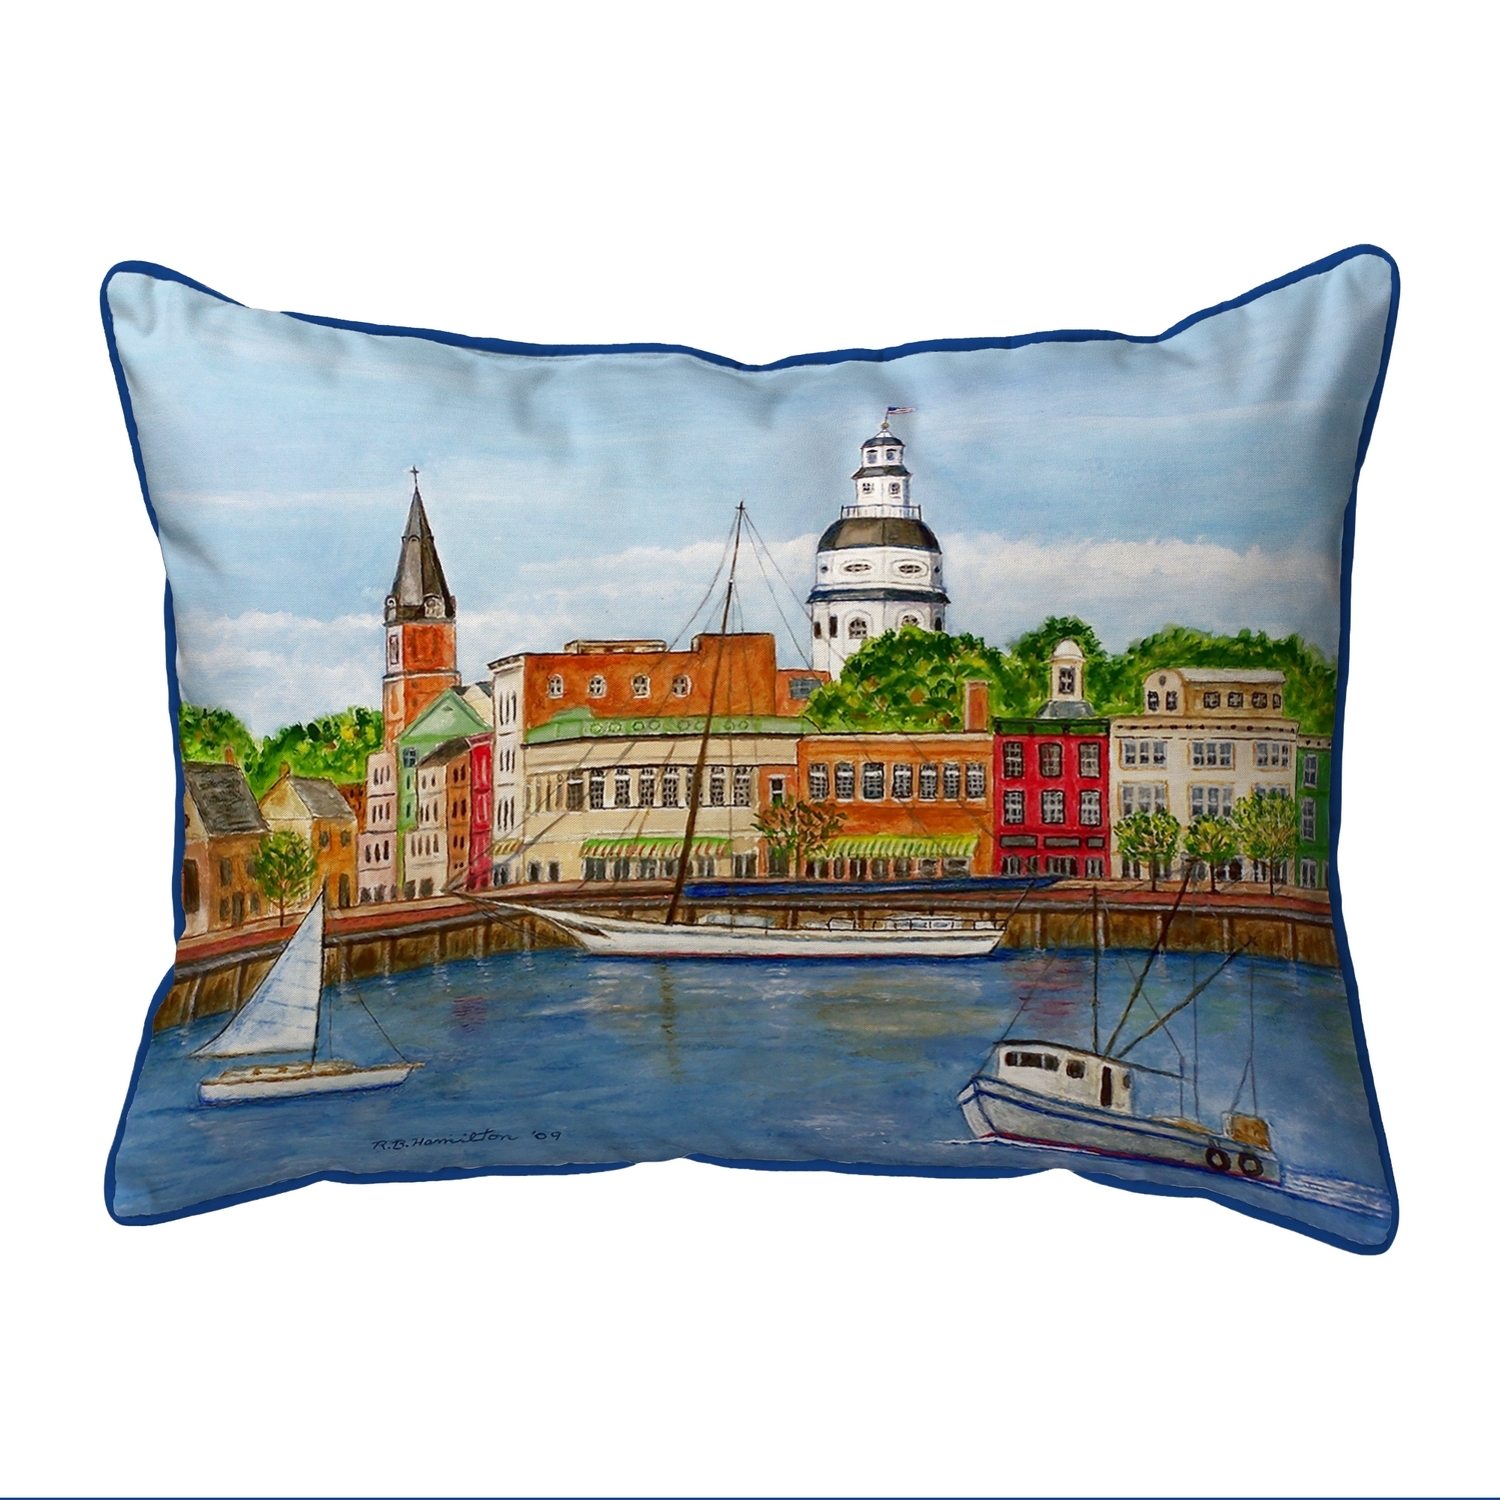 Primary image for Betsy Drake Annapolis City Dock Extra Large 20 X 24 Indoor Outdoor Pillow